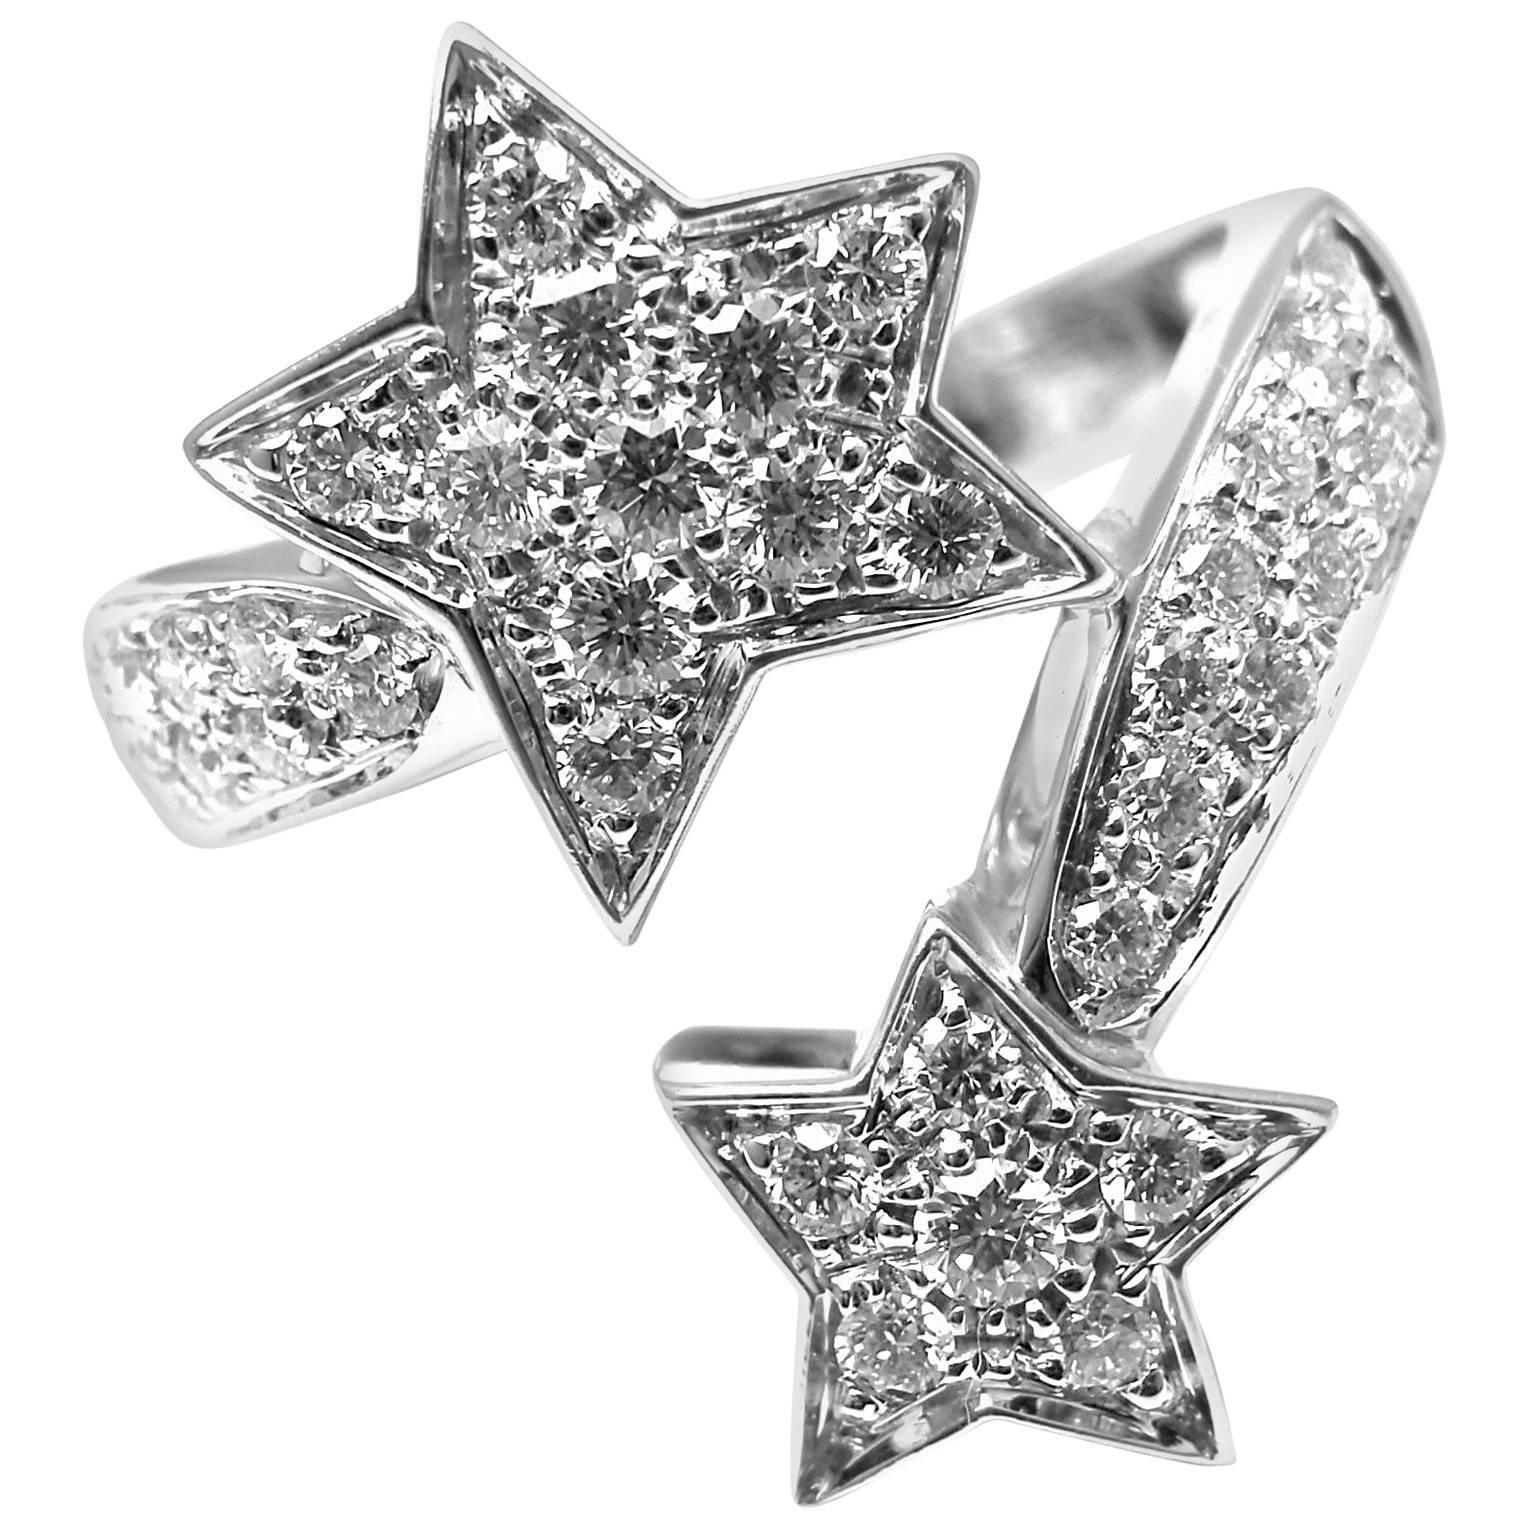 Chanel Star Ring - 15 For Sale on 1stDibs  chanel comete ring, chanel star  rings, chanel ring band